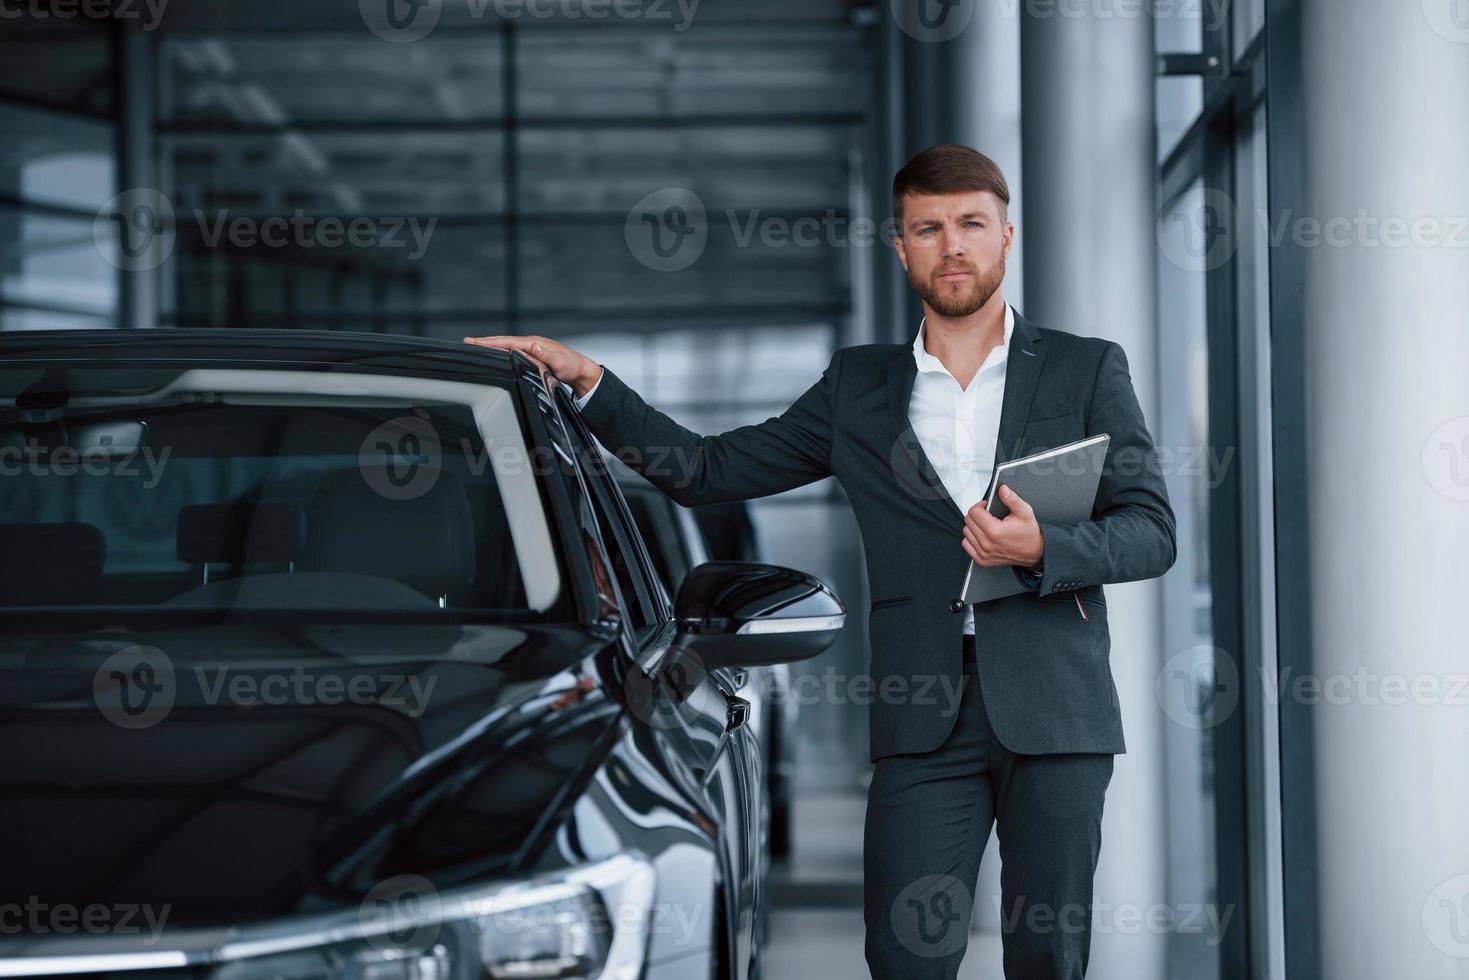 With silver note pad in hand. Modern stylish bearded businessman in the automobile saloon photo